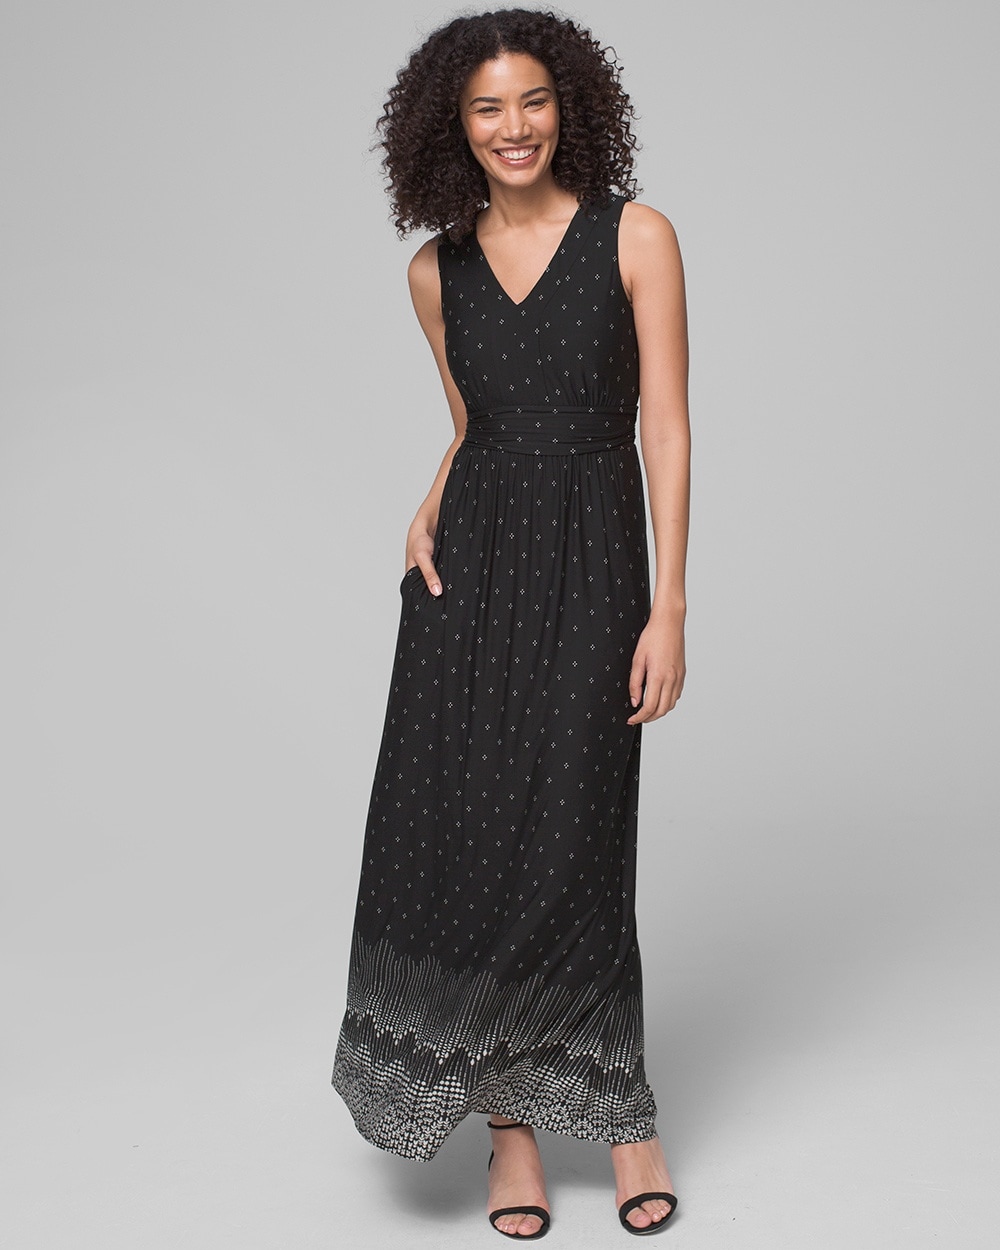 V Neck Maxi Dress With Built-In Bra